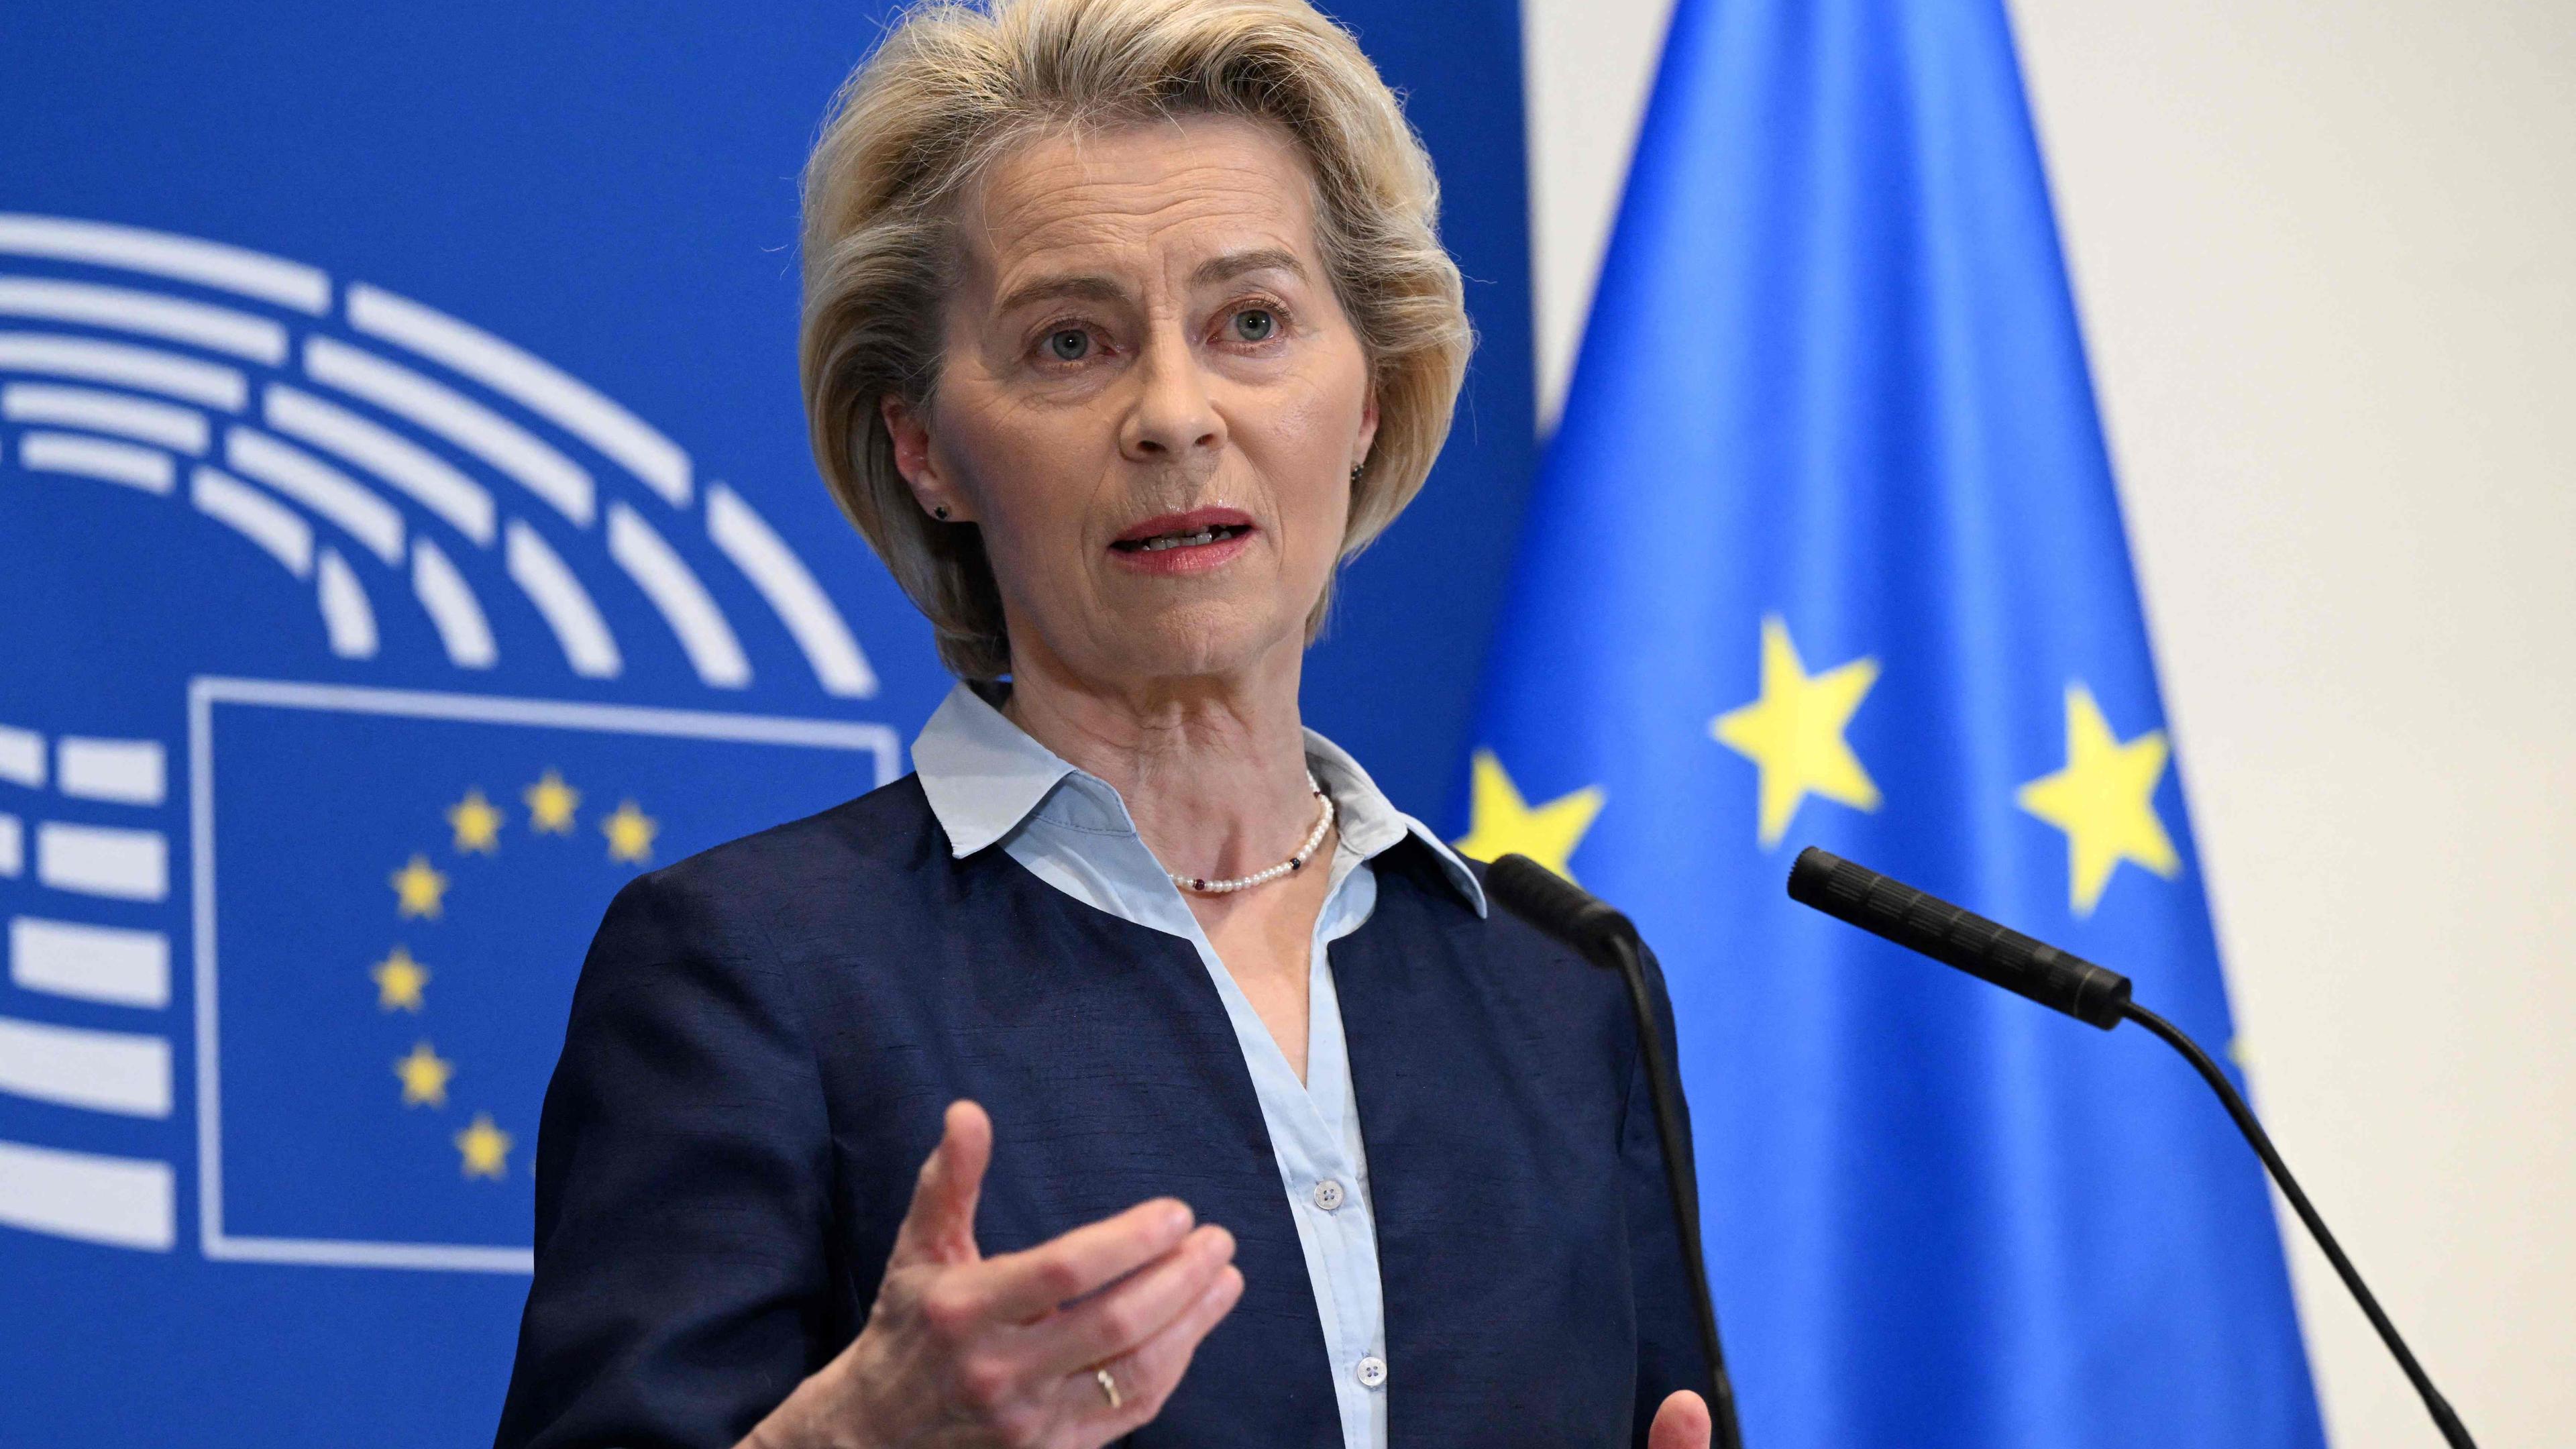 Cooperation with far-right party not impossible, said von der Leyen